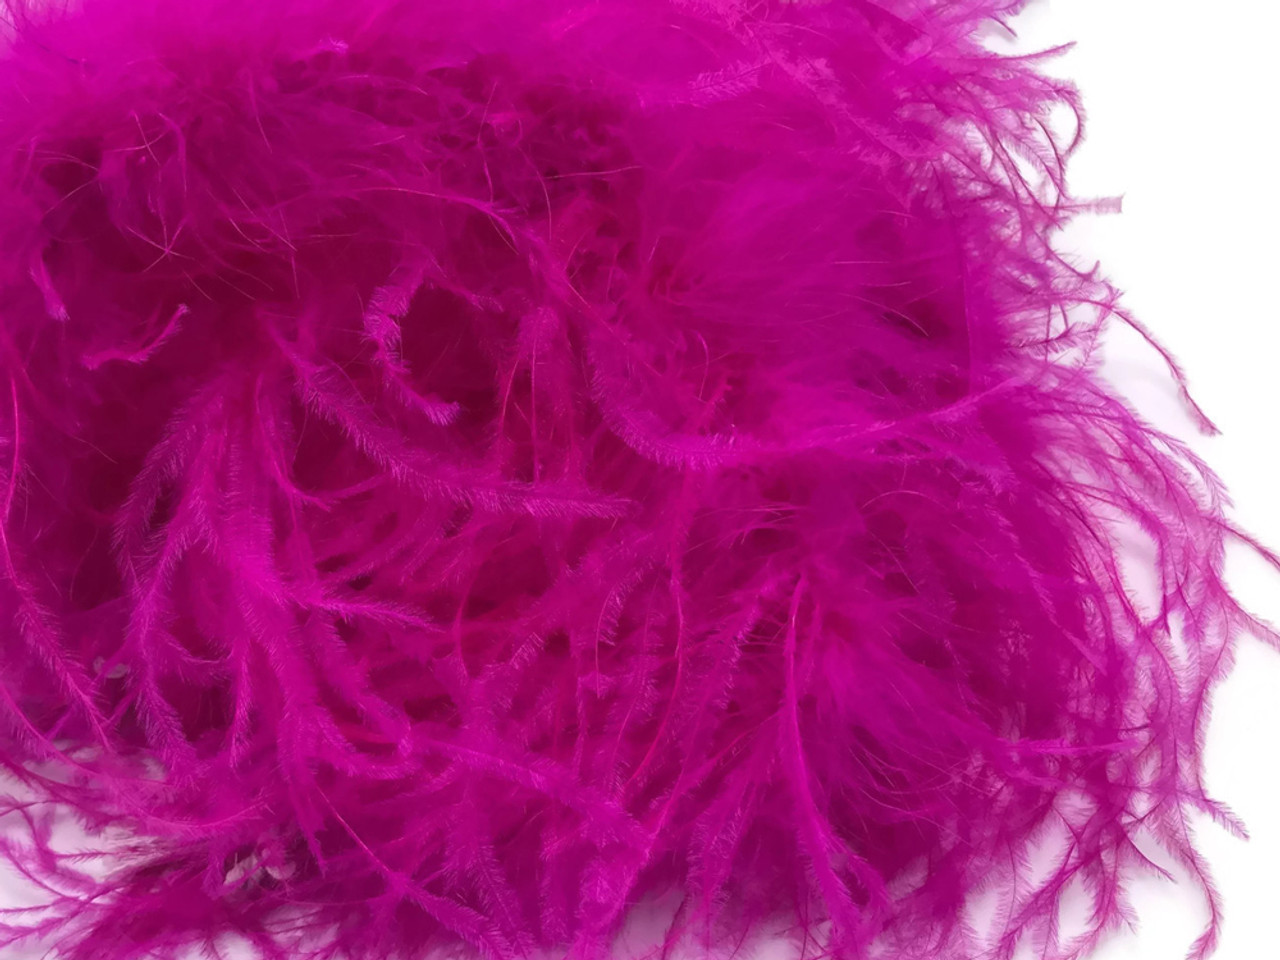 Pink Bird Feathers In Soft And Blur Style, Fluffy Pink Feather